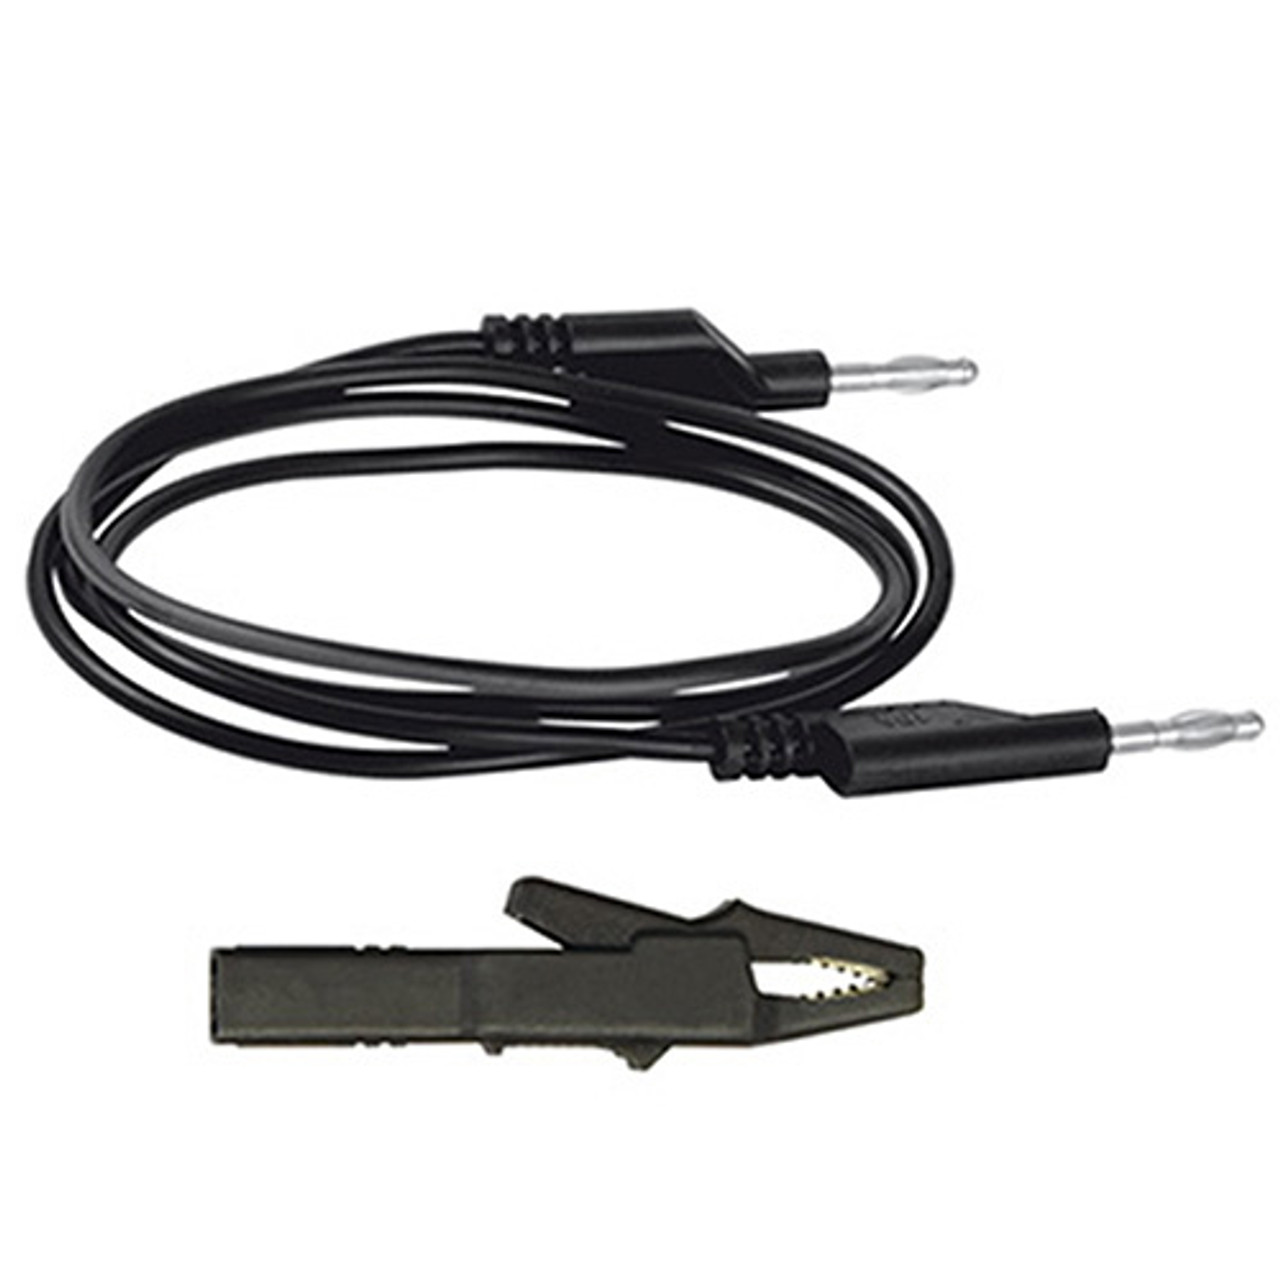 Lead Wires for the Jentner® RMGO! - Black Lead Wire (with Clip)